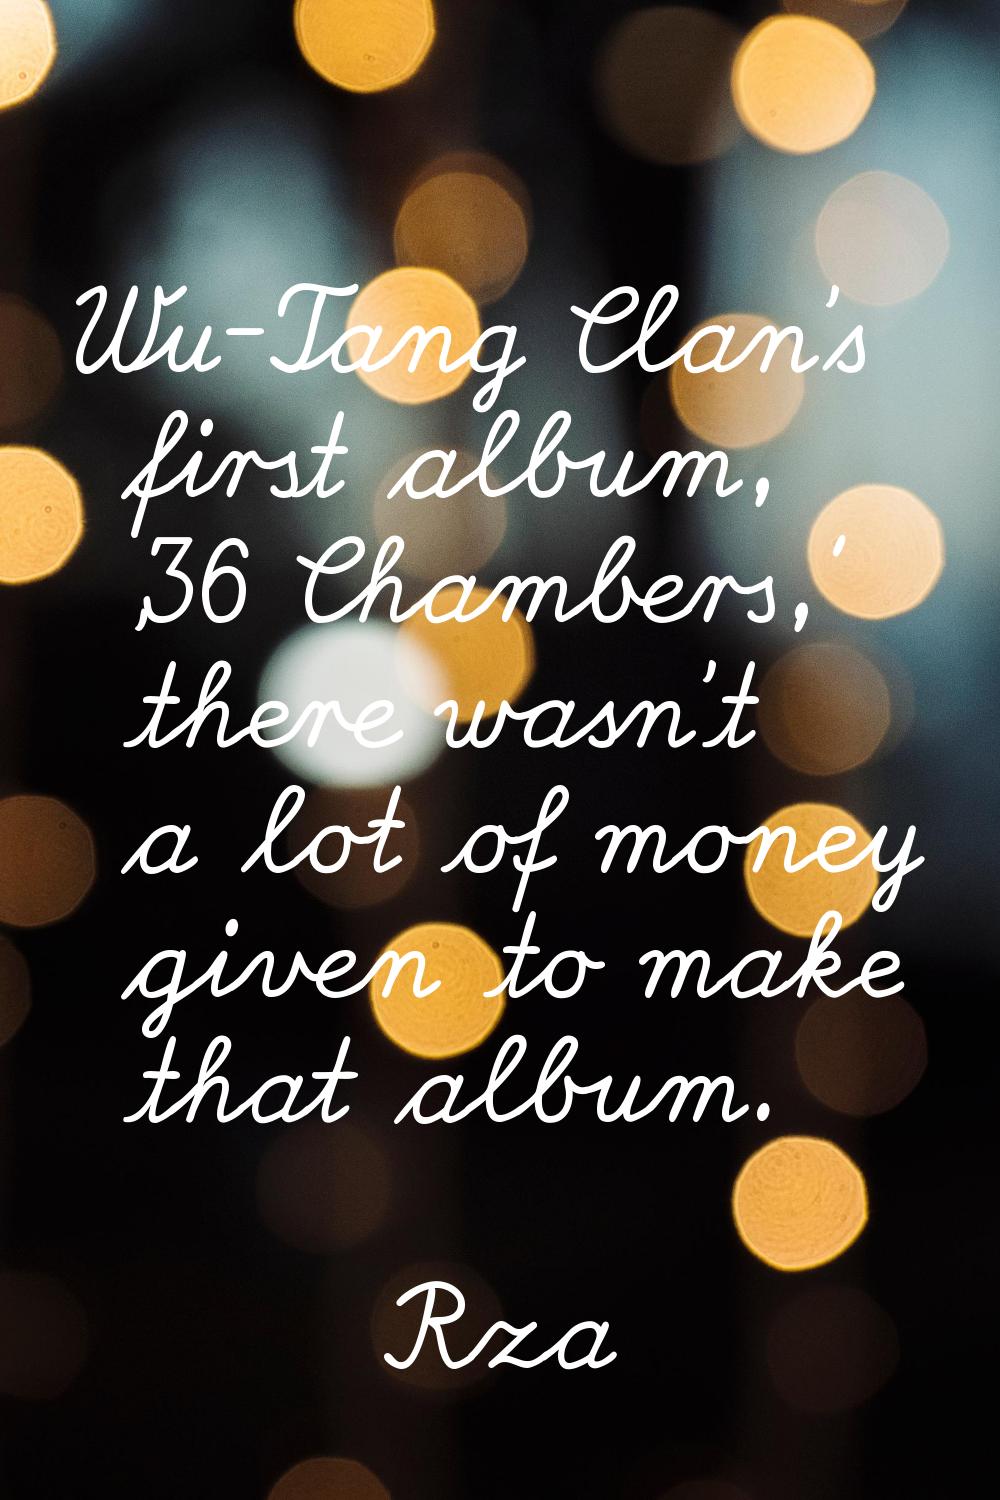 Wu-Tang Clan's first album, '36 Chambers,' there wasn't a lot of money given to make that album.